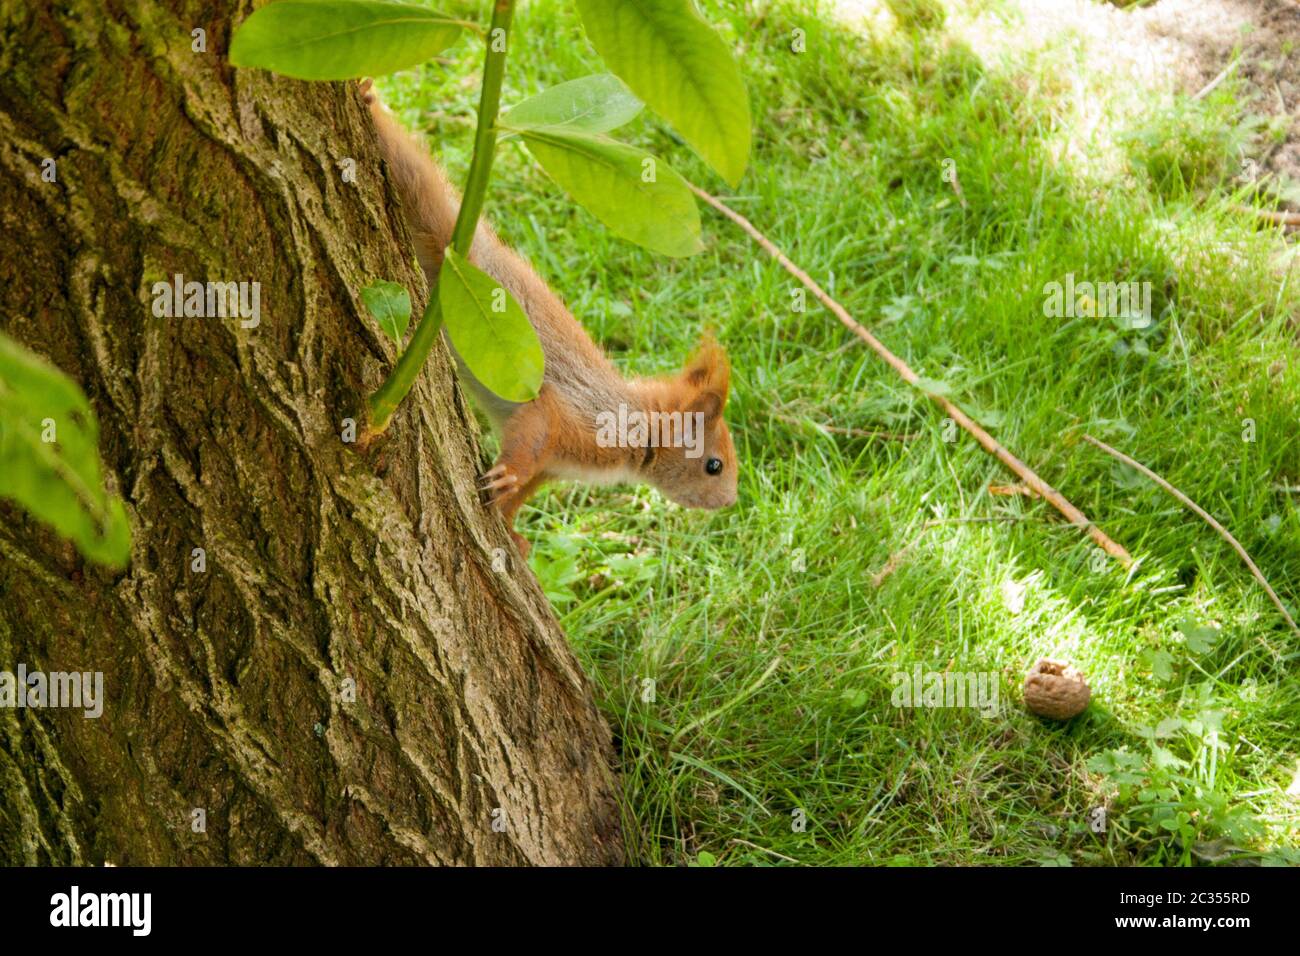 Squirrel gaining for a nut Stock Photo